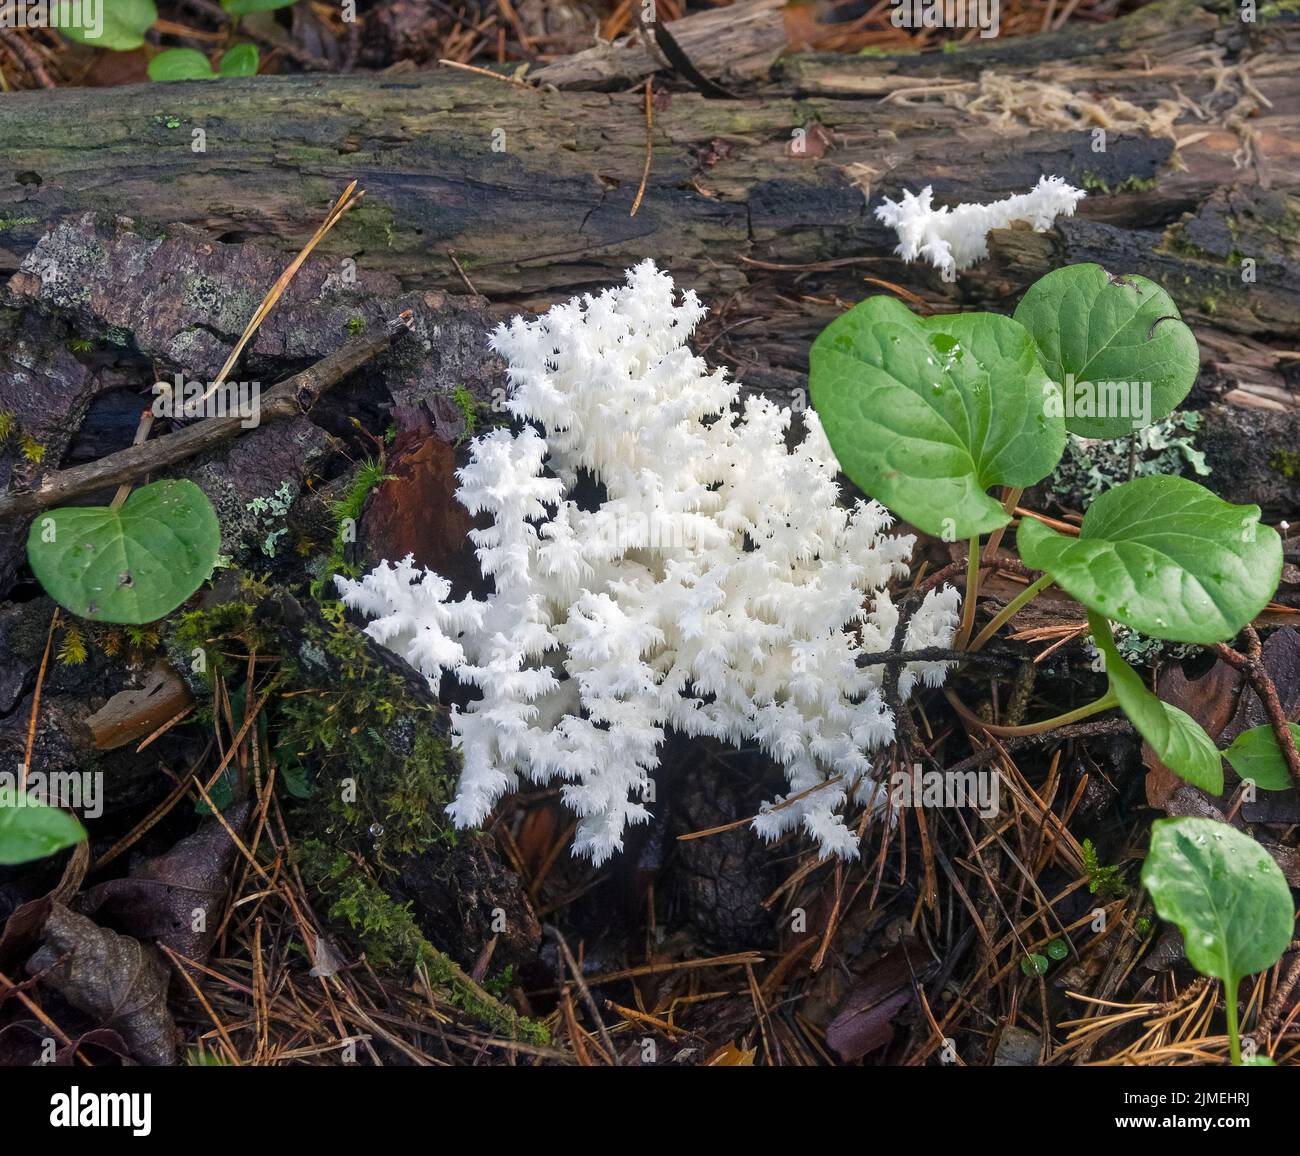 Coral Tooth Fungus in Siberian forest. Stock Photo